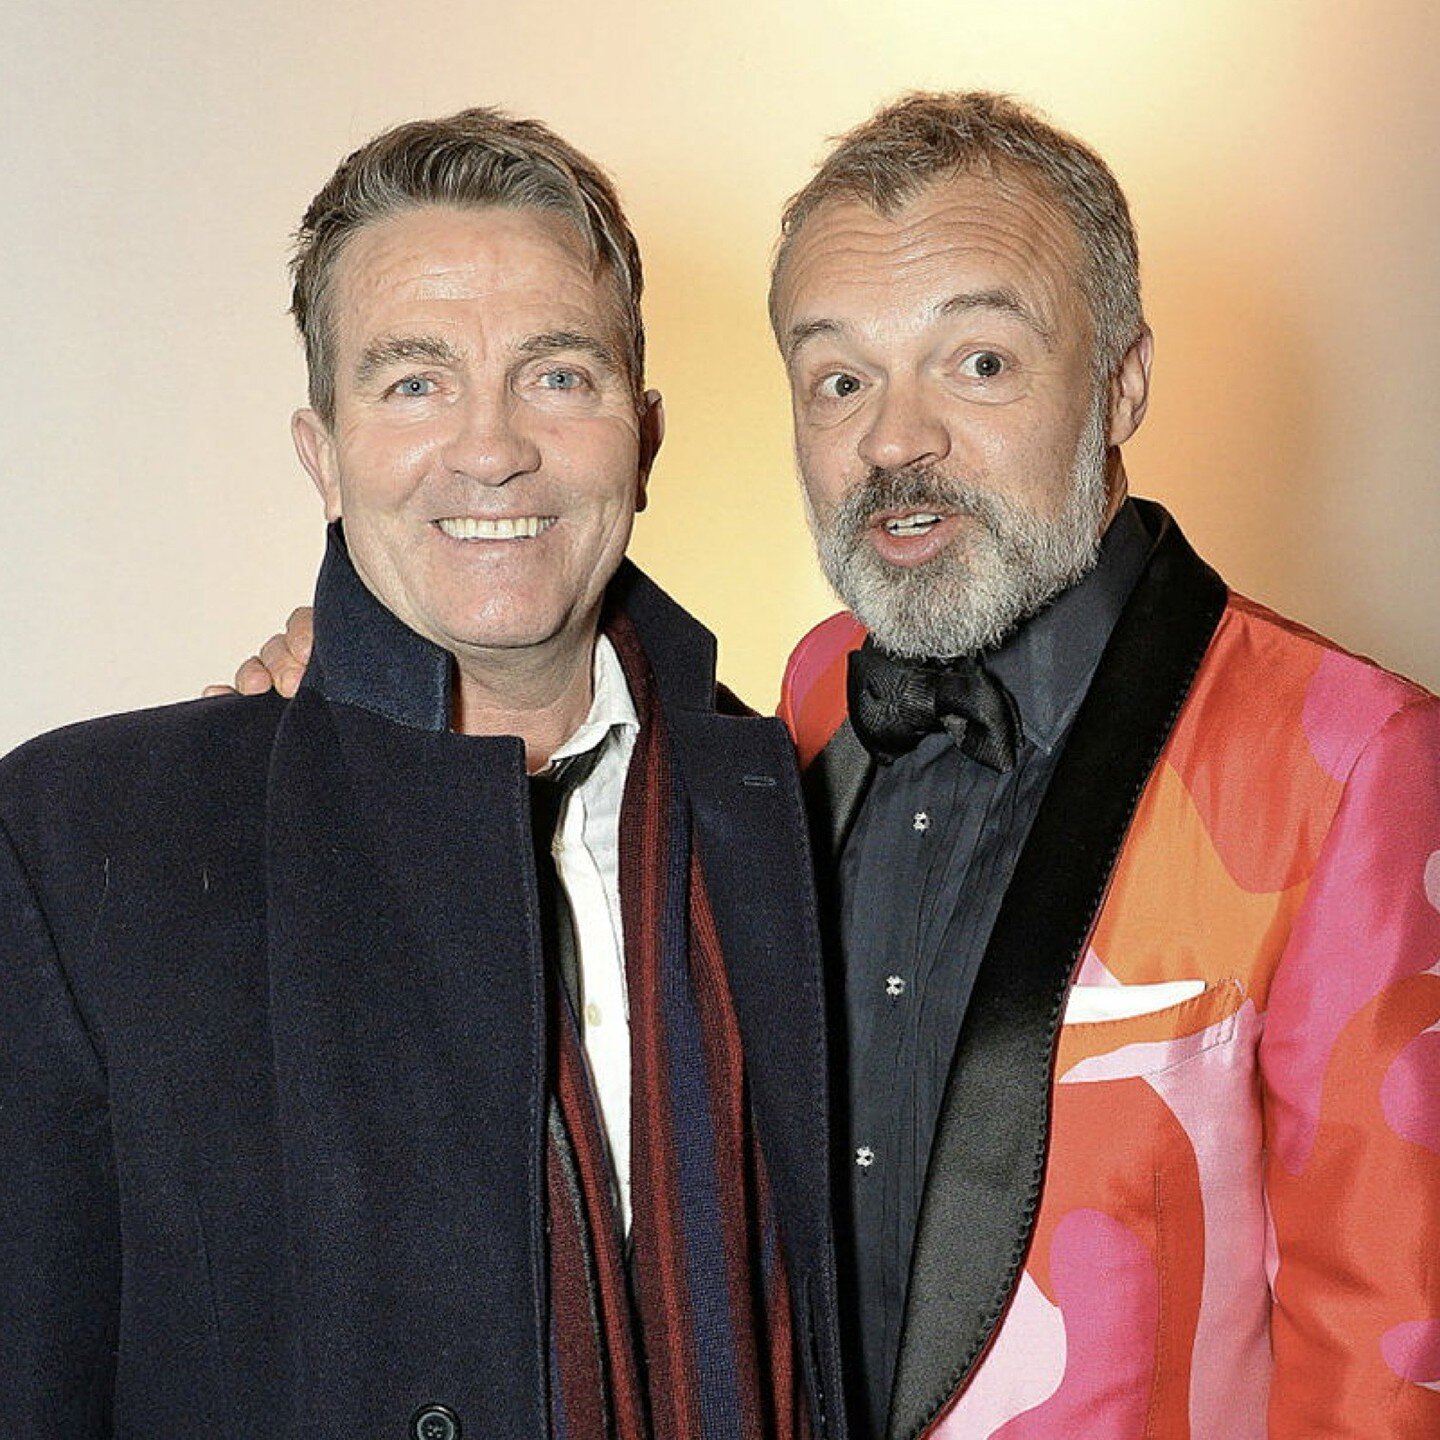 Here's Bradley Walsh and Graham Norton backstage at the NTA Awards. Bradley chatting about joining Dr Who, to which Graham said he'd already been in it as a cartoon animation, when the BBC accidently ran an advert tor Over the Rainbow during the clif